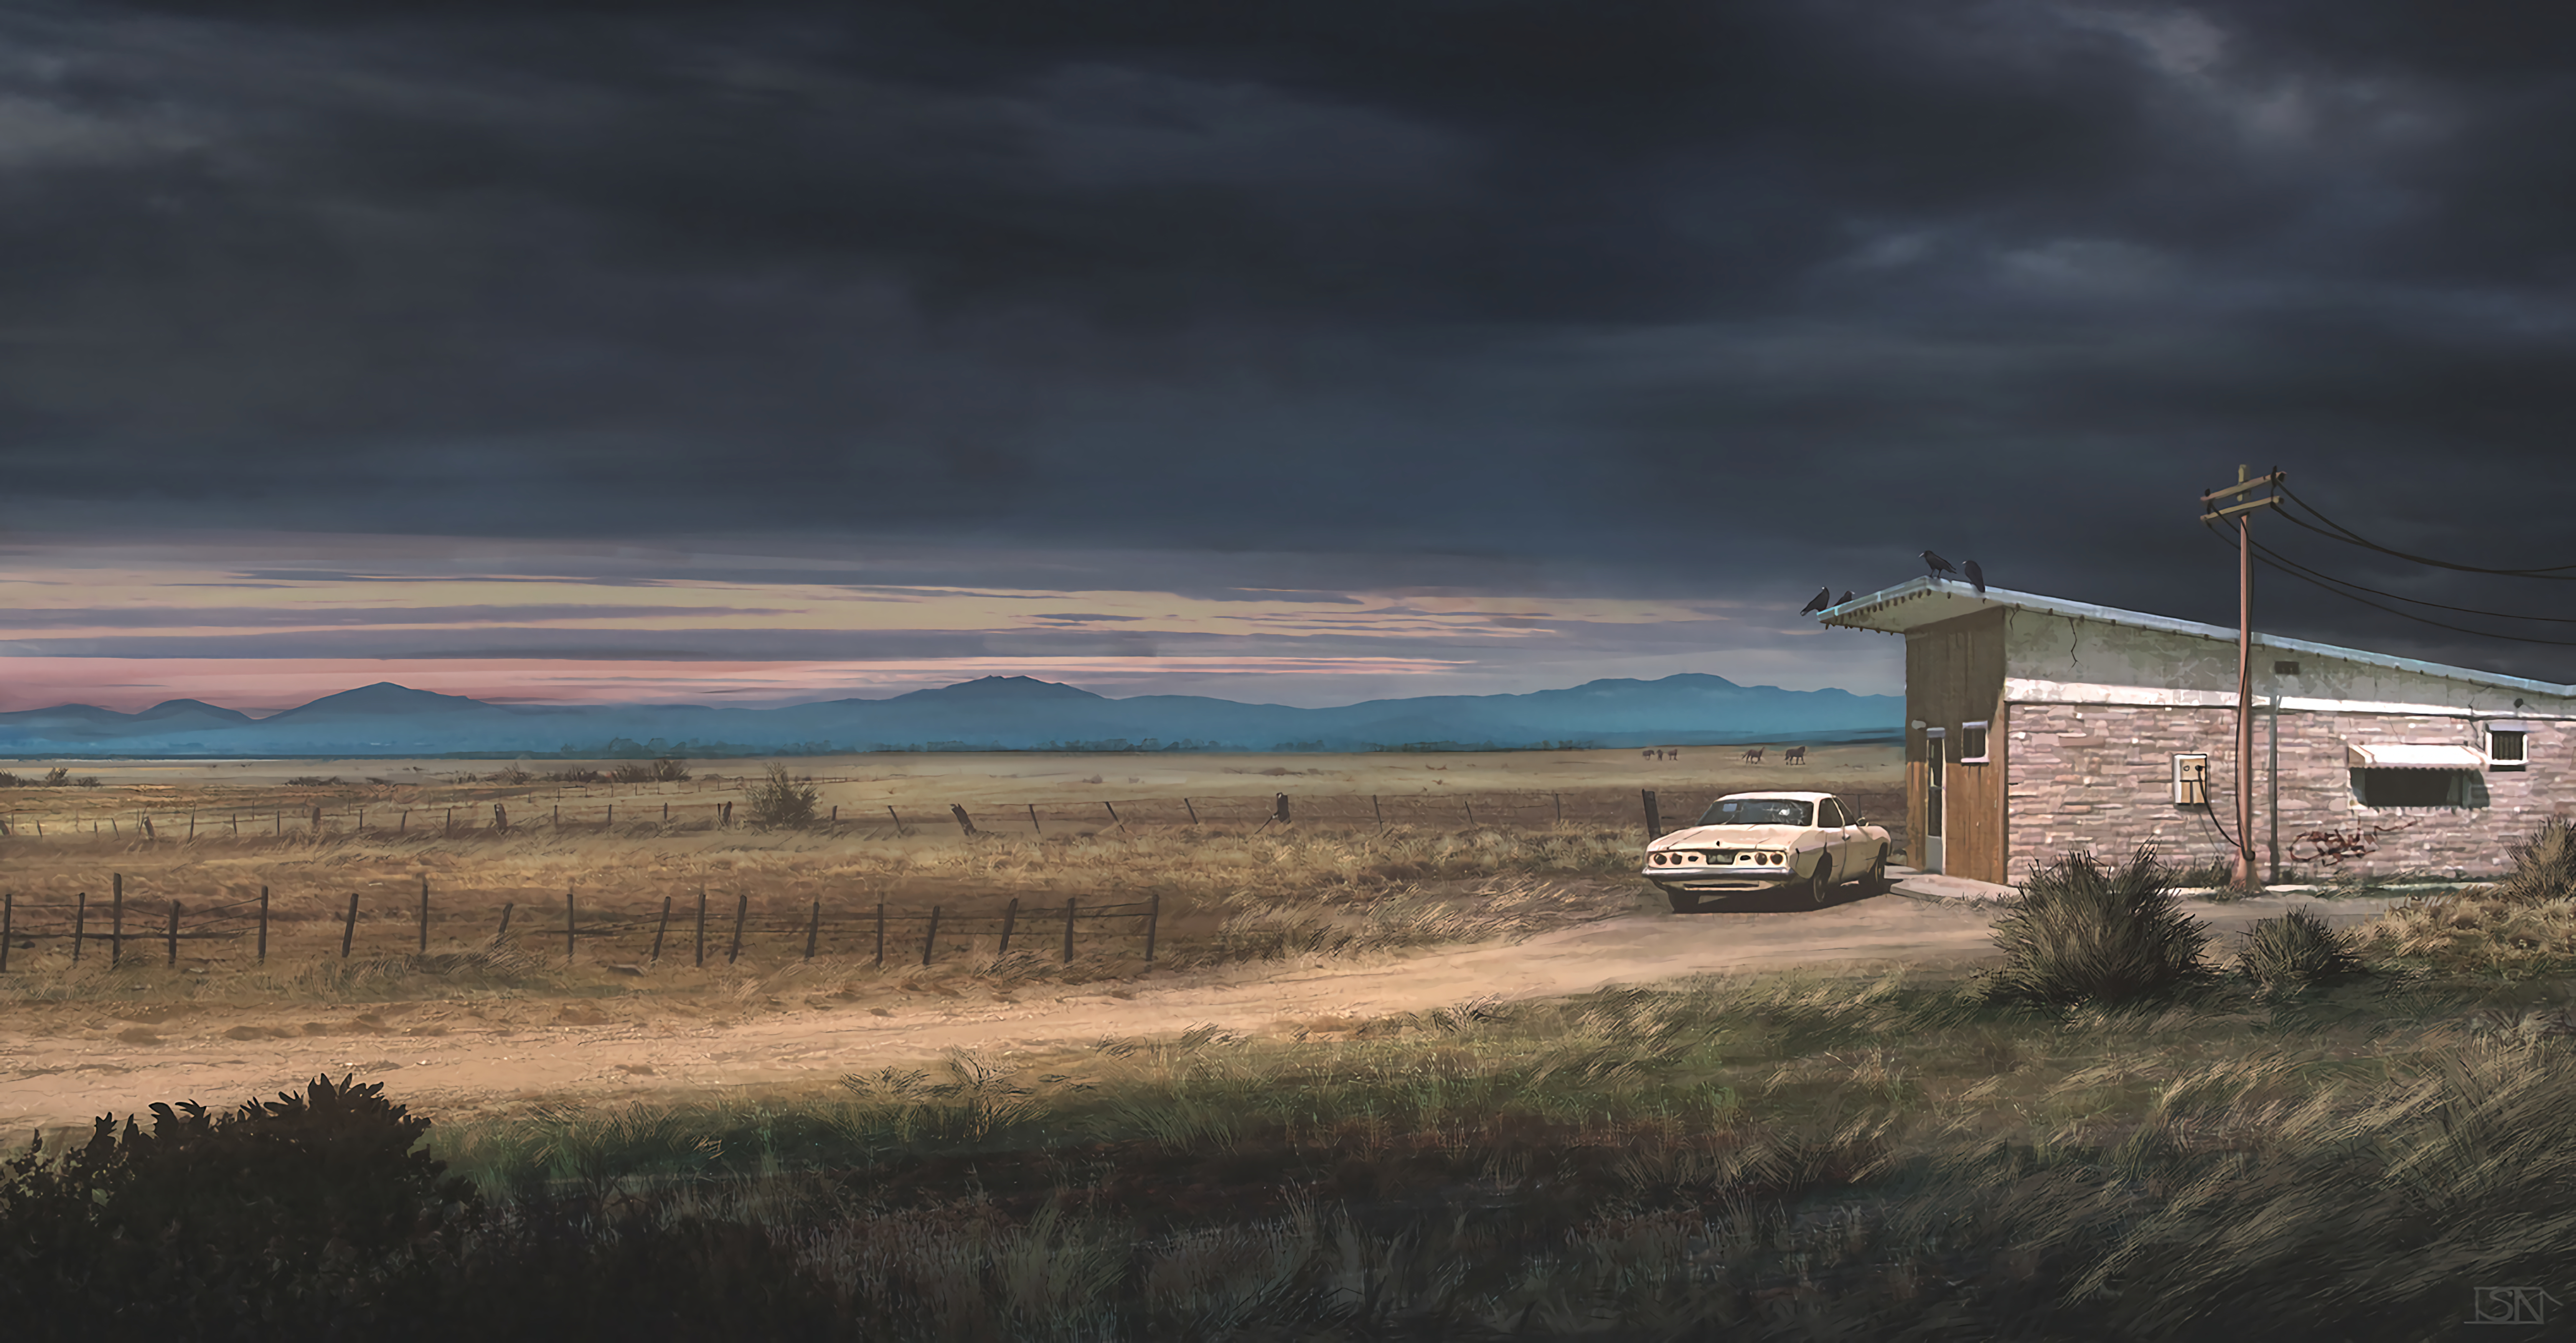 99394 download wallpaper art, landscape, building, car, country, ranch, rain clouds screensavers and pictures for free